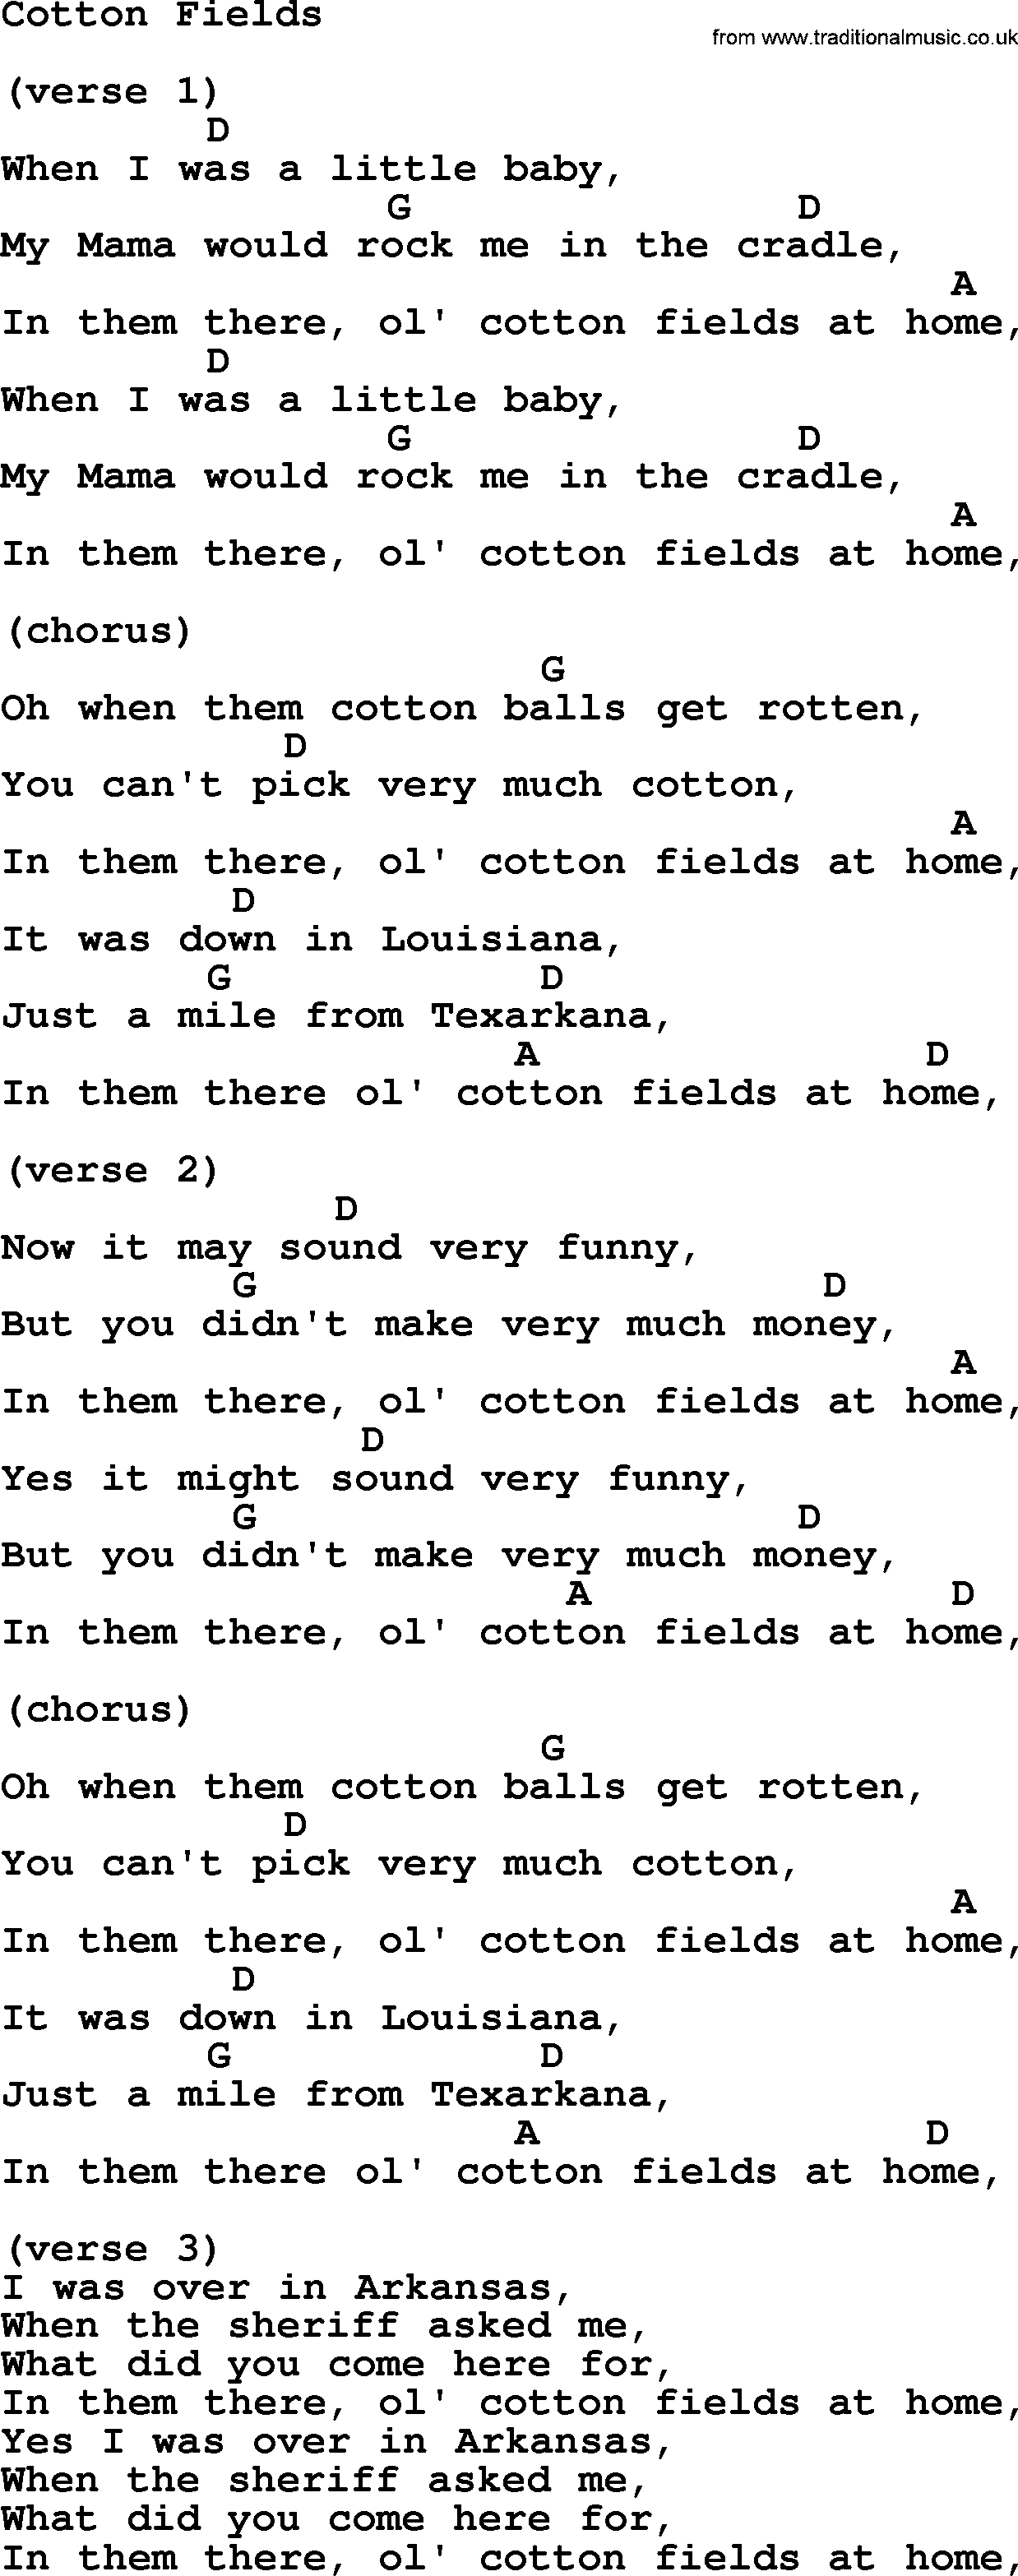 Johnny Cash song Cotton Fields, lyrics and chords